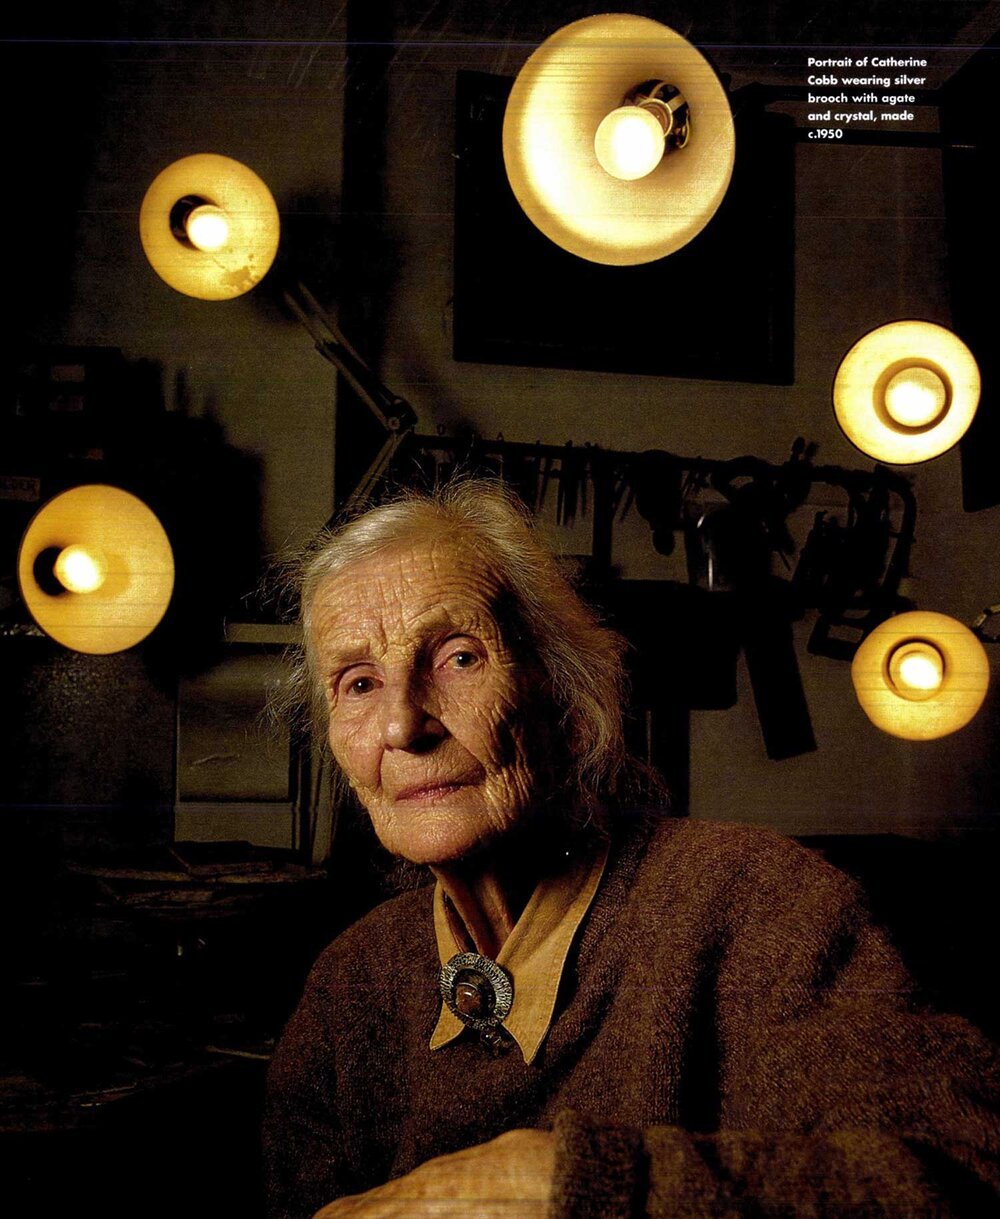 Casty Cobb in Crafts Magazine 1994 (photo by Paul Tozer).